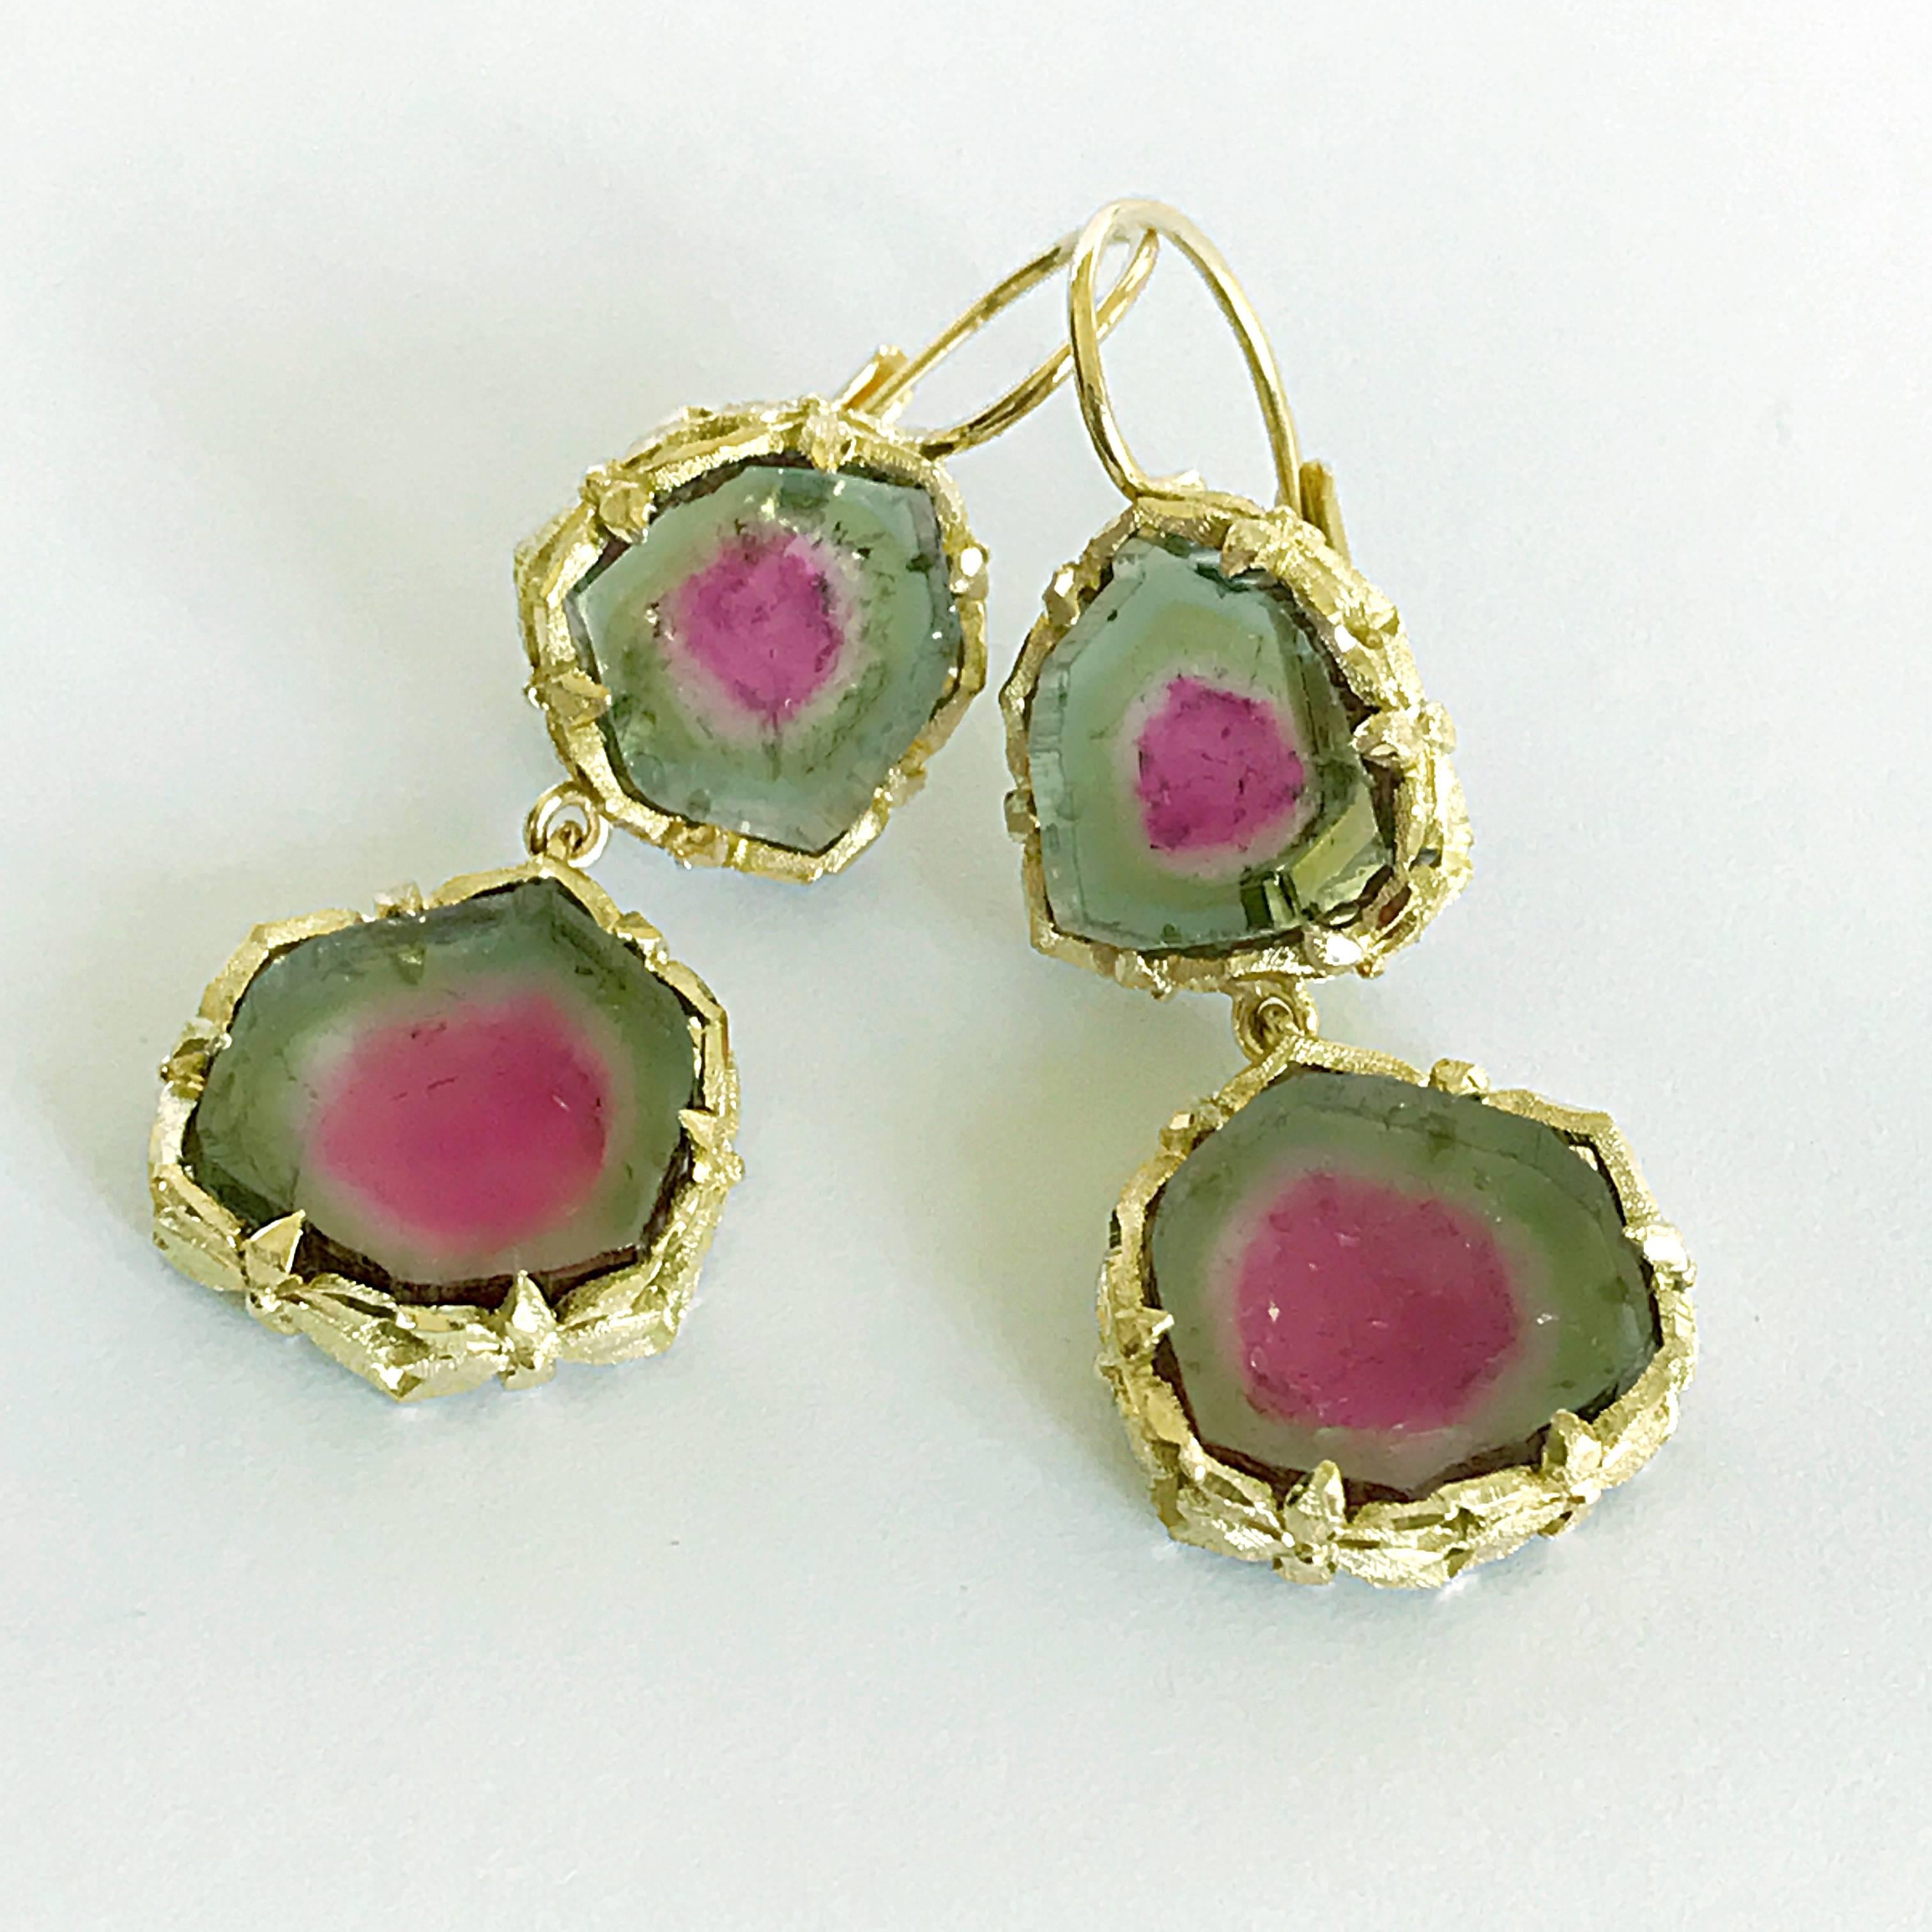 Dalben design 18 kt hand engraved yellow gold dangle earrings with four red-green watermelon  Tourmaline weighting 21,2 carat . 
Dimension: 
width 15 mm height without leverback 30 mm  
The earrings has been designed and handcrafted in our atelier